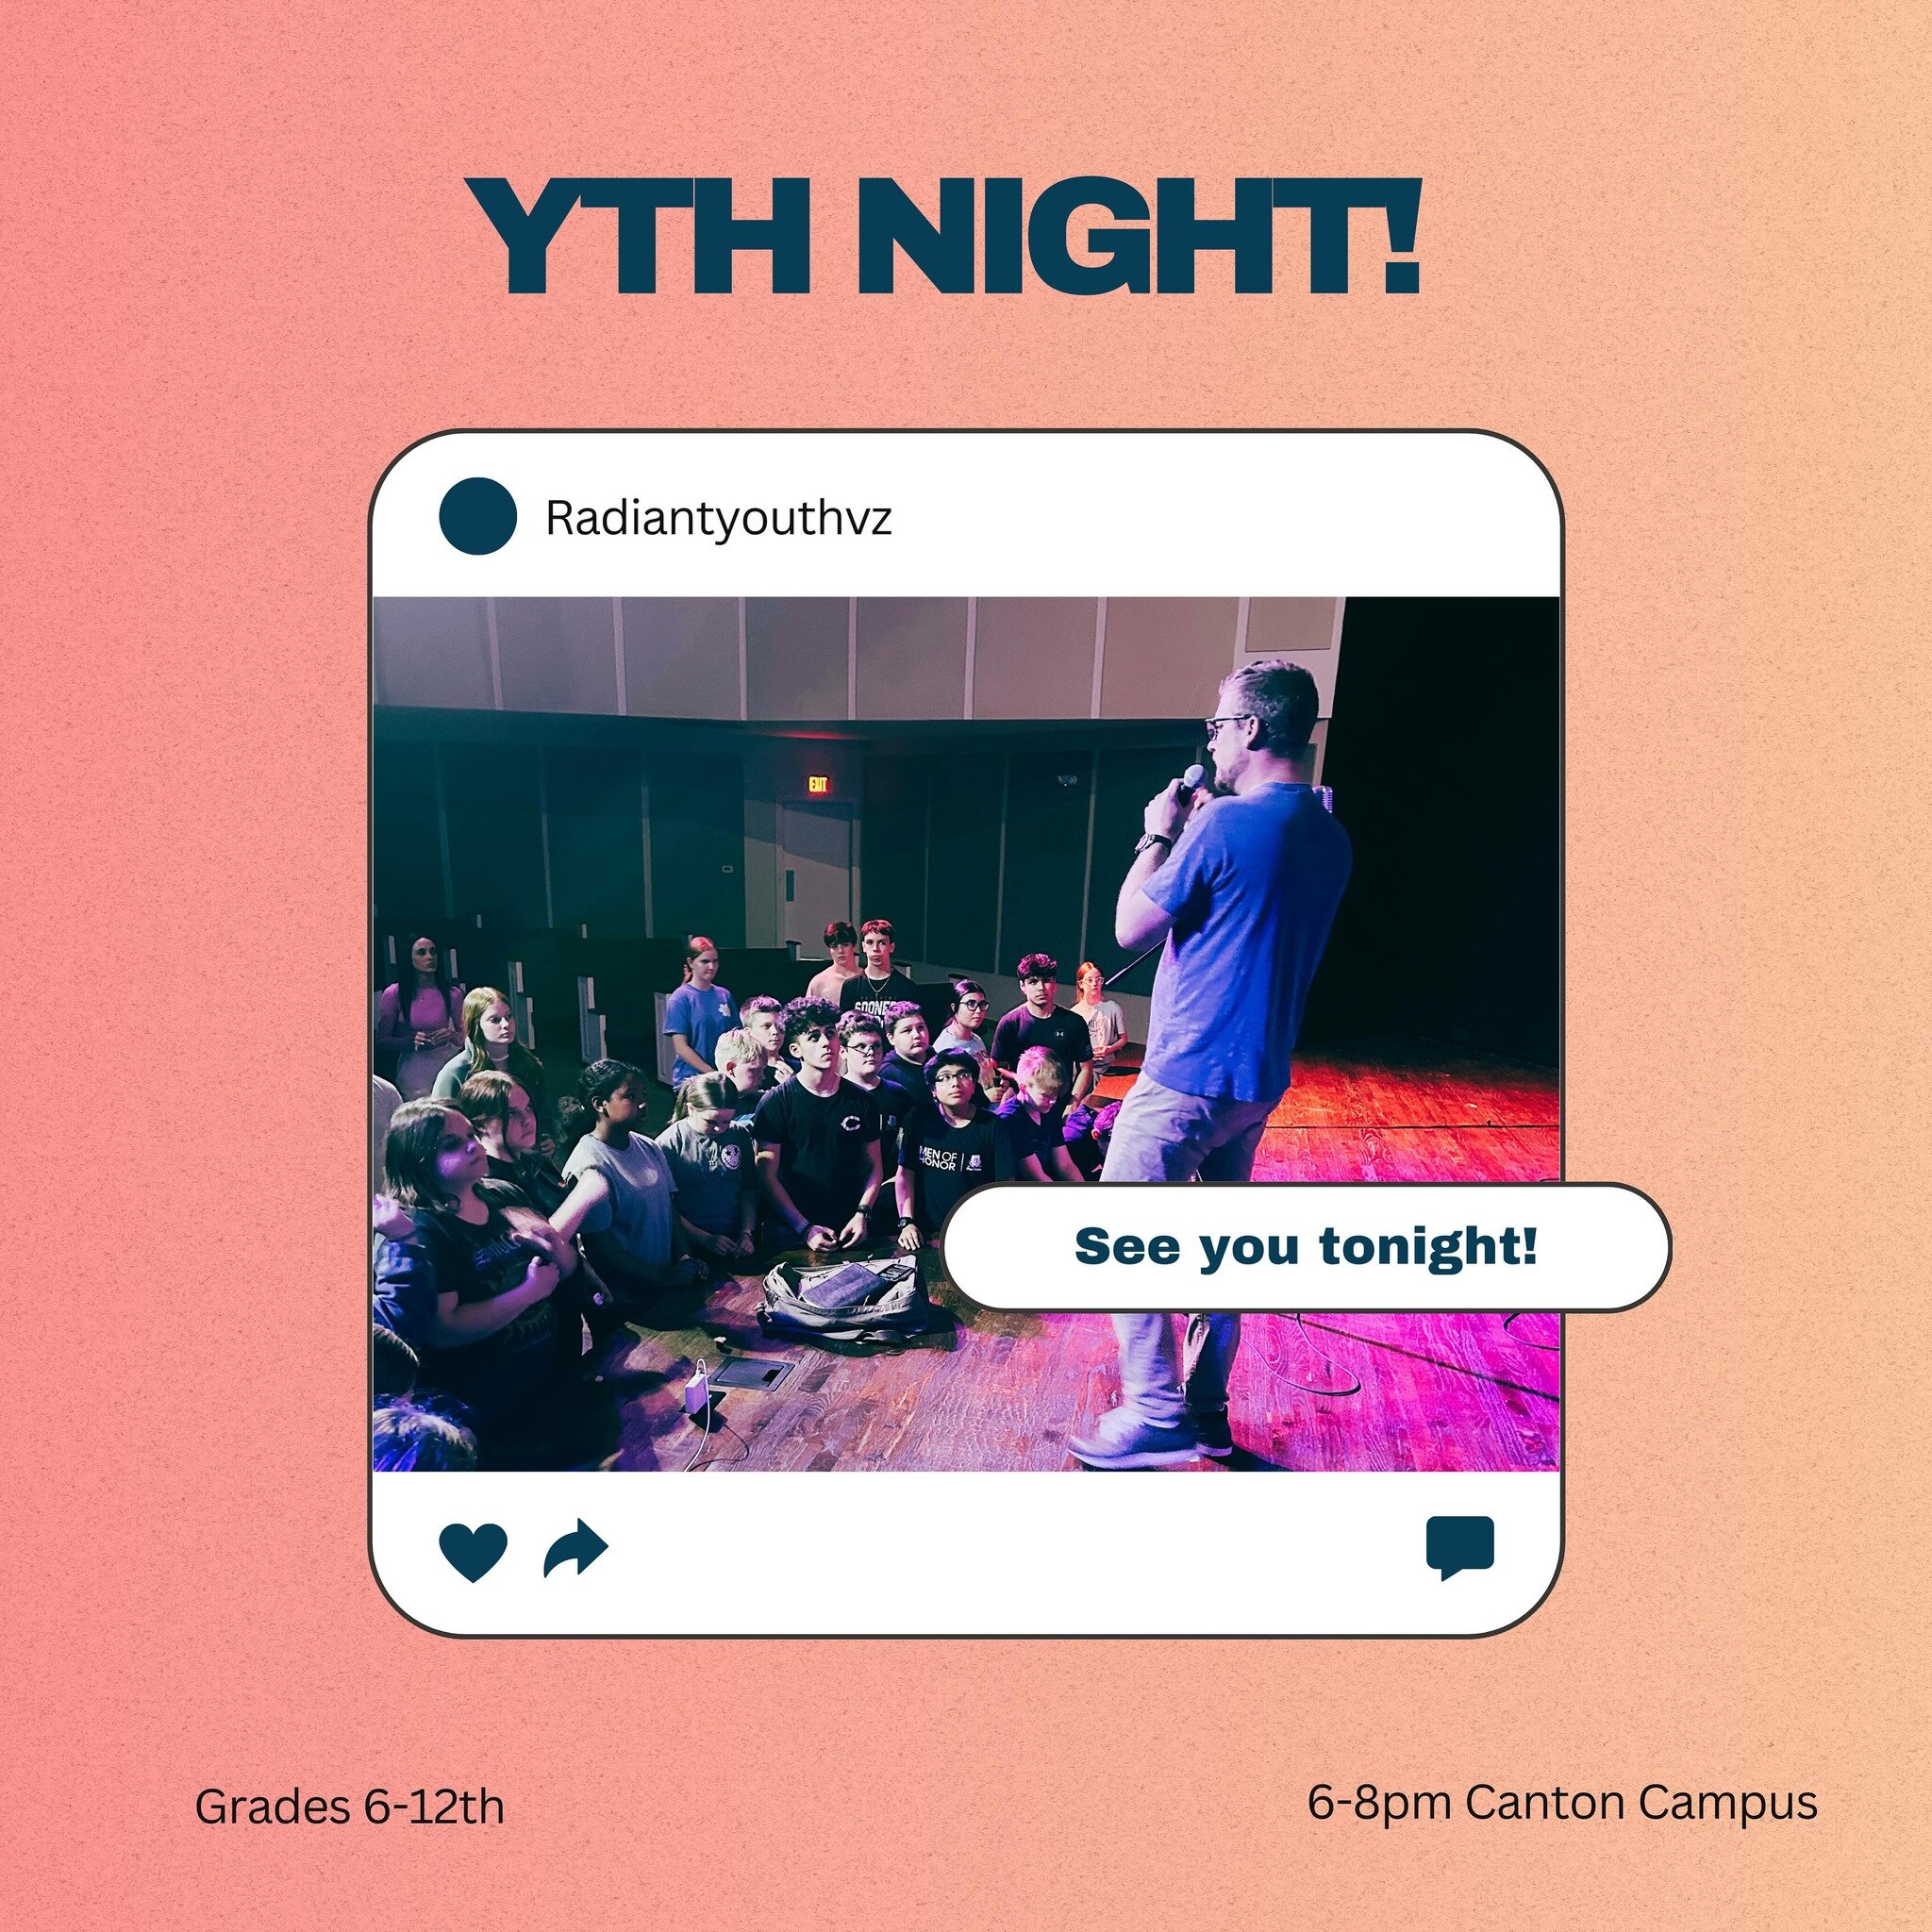 Youth nights are the best nights! Raise your hand if you are coming! All the fun starts at 6! See you there!